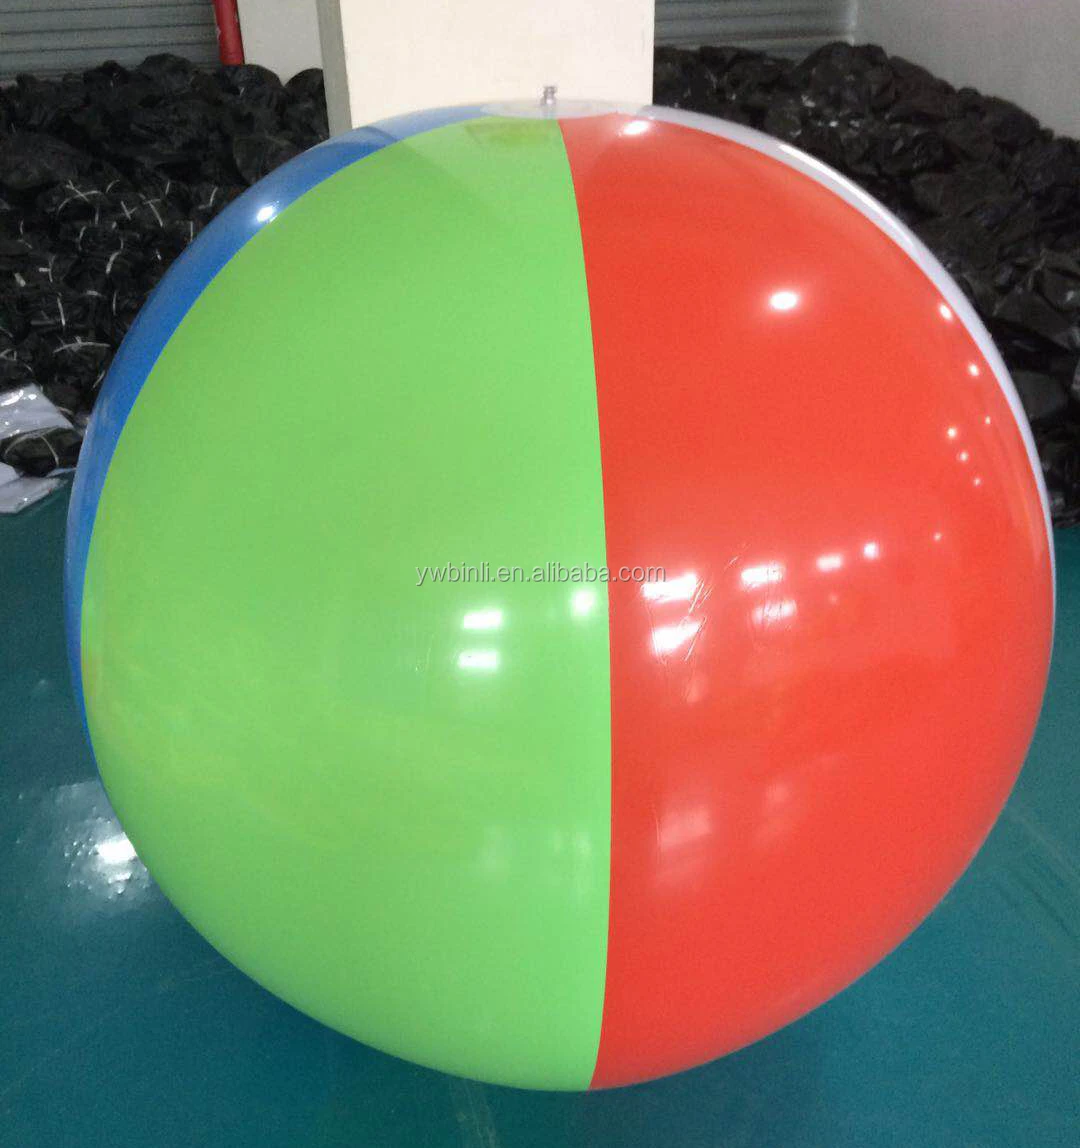 PACK OF 100x LARGE INFLATABLE BEACH BALL 107cm Circumference 